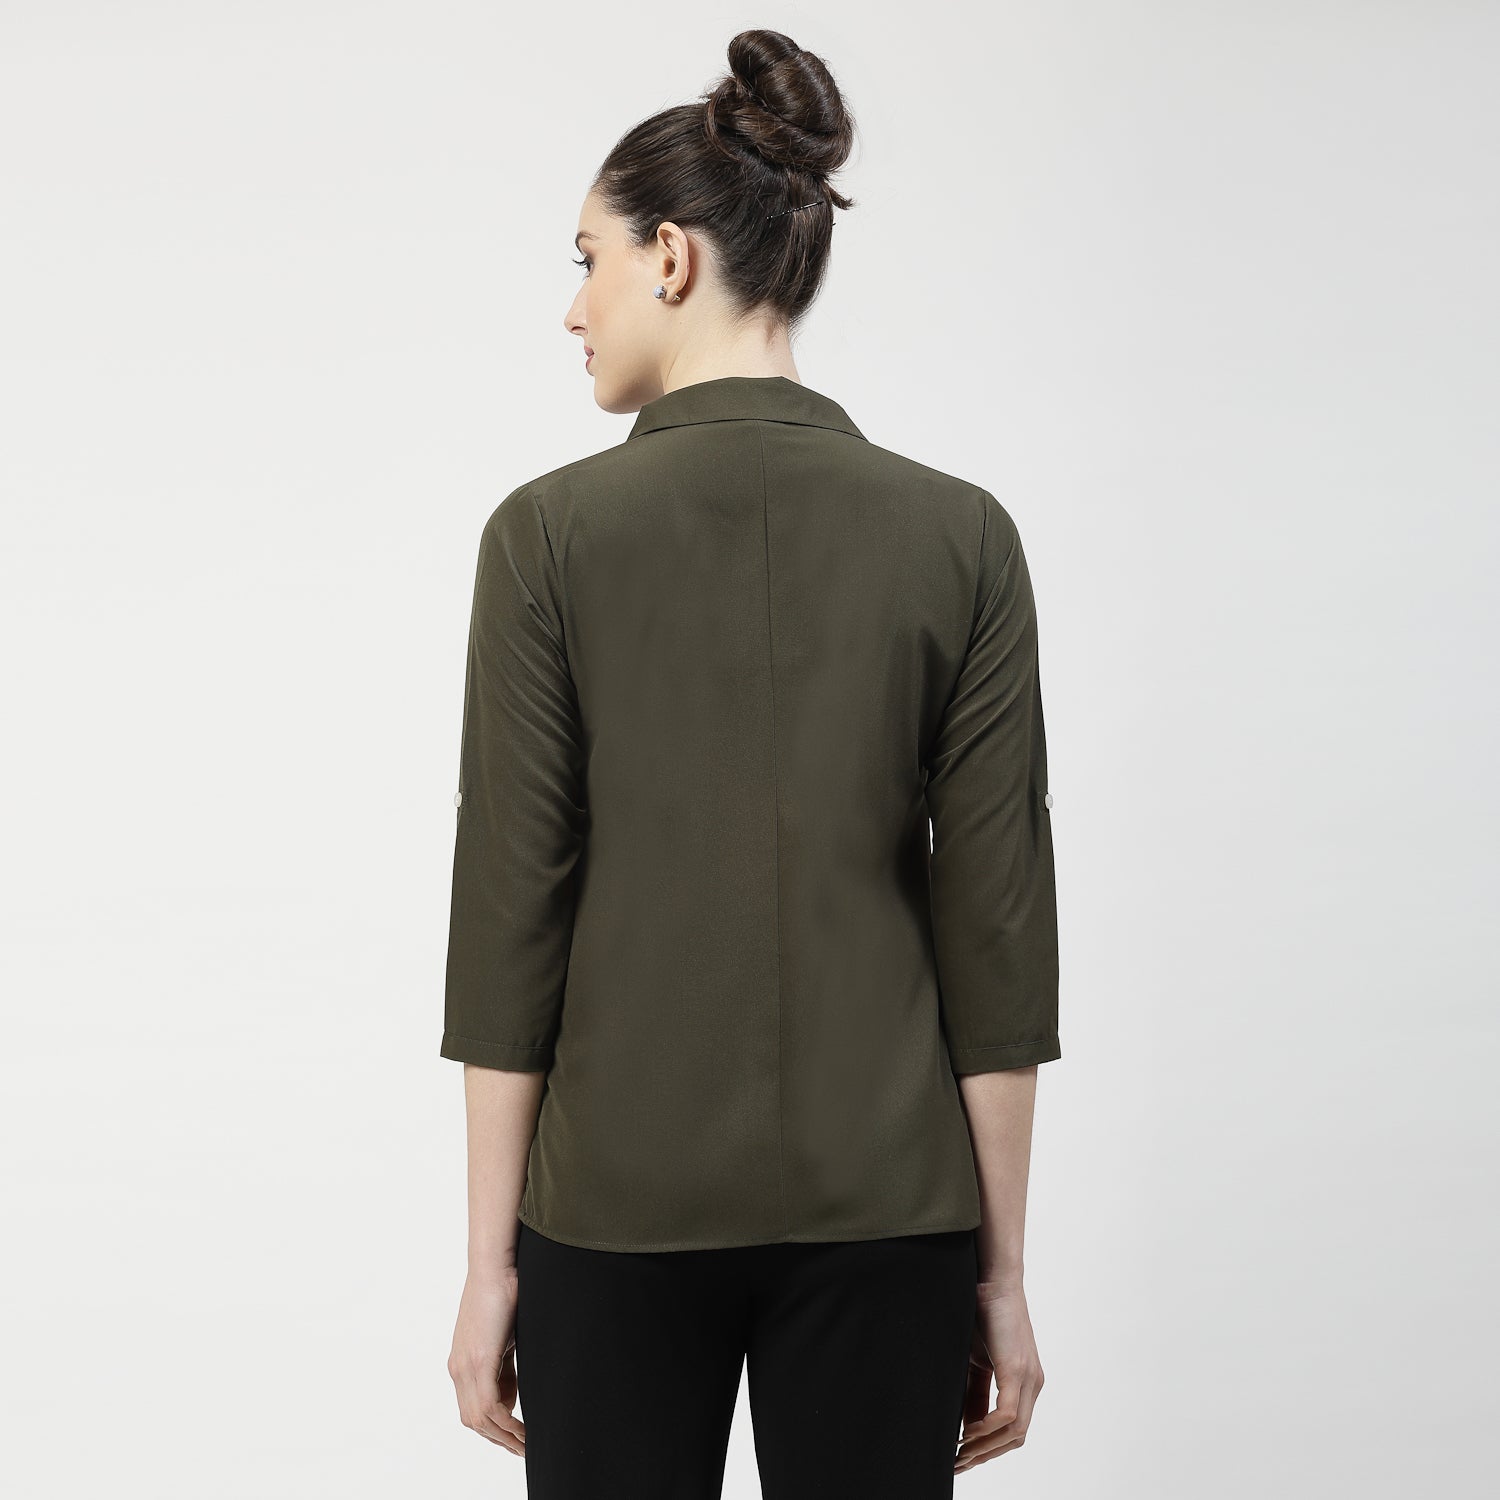 Olive V Neck Top With Collar